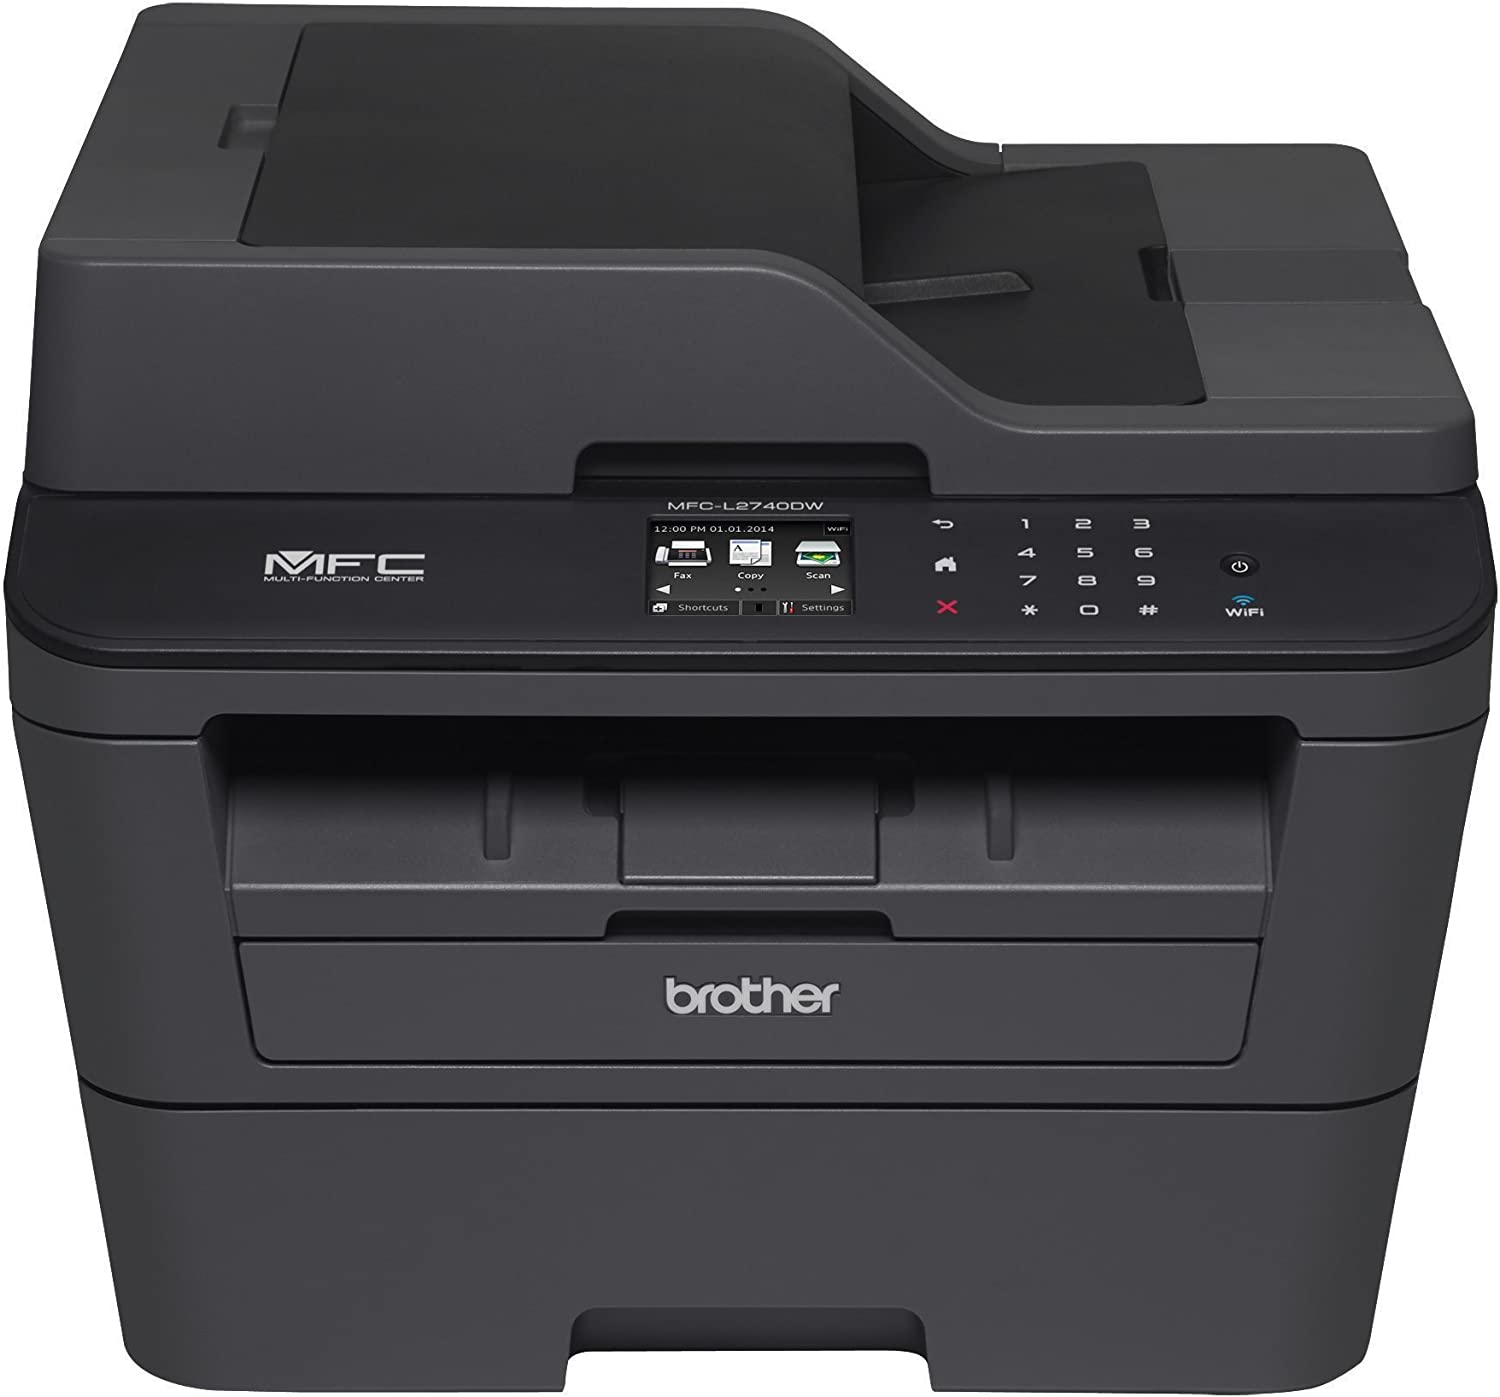 5. Brother MFCL2740DW Wireless Printer: